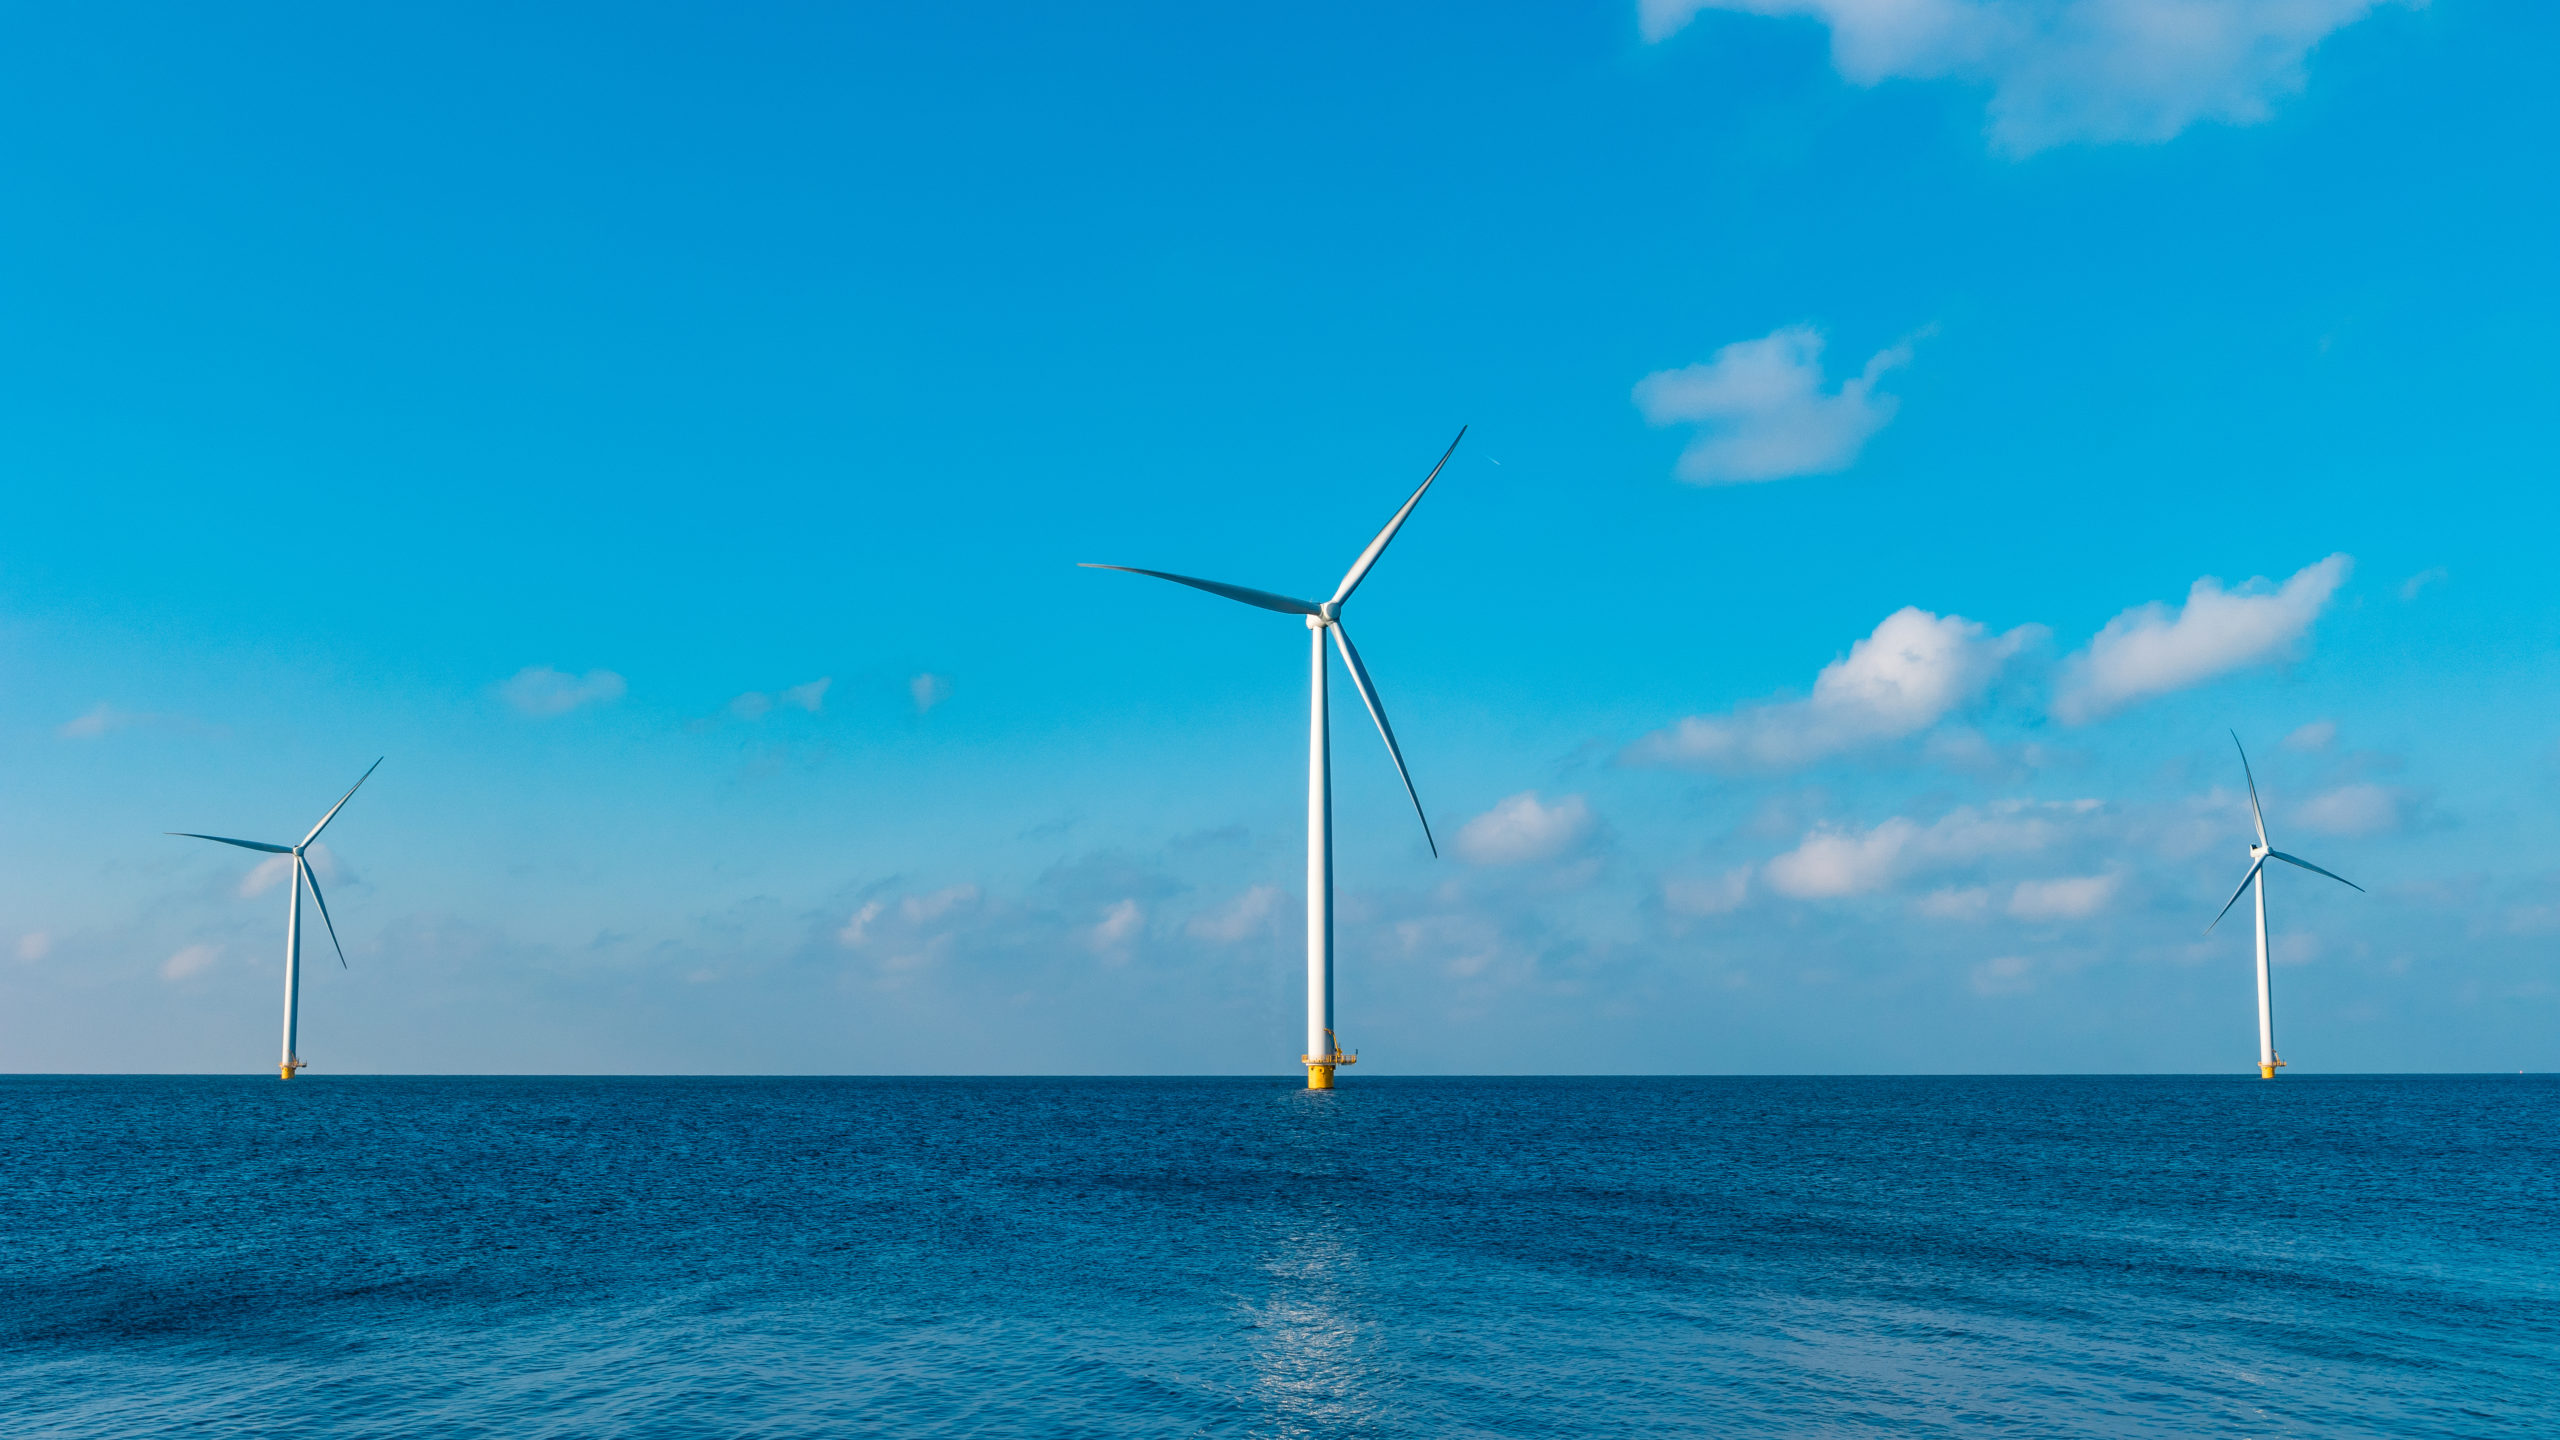 Anbaric Applauds Governor Hochul’s Commitment to the Offshore Wind Industry and Transmission Planning